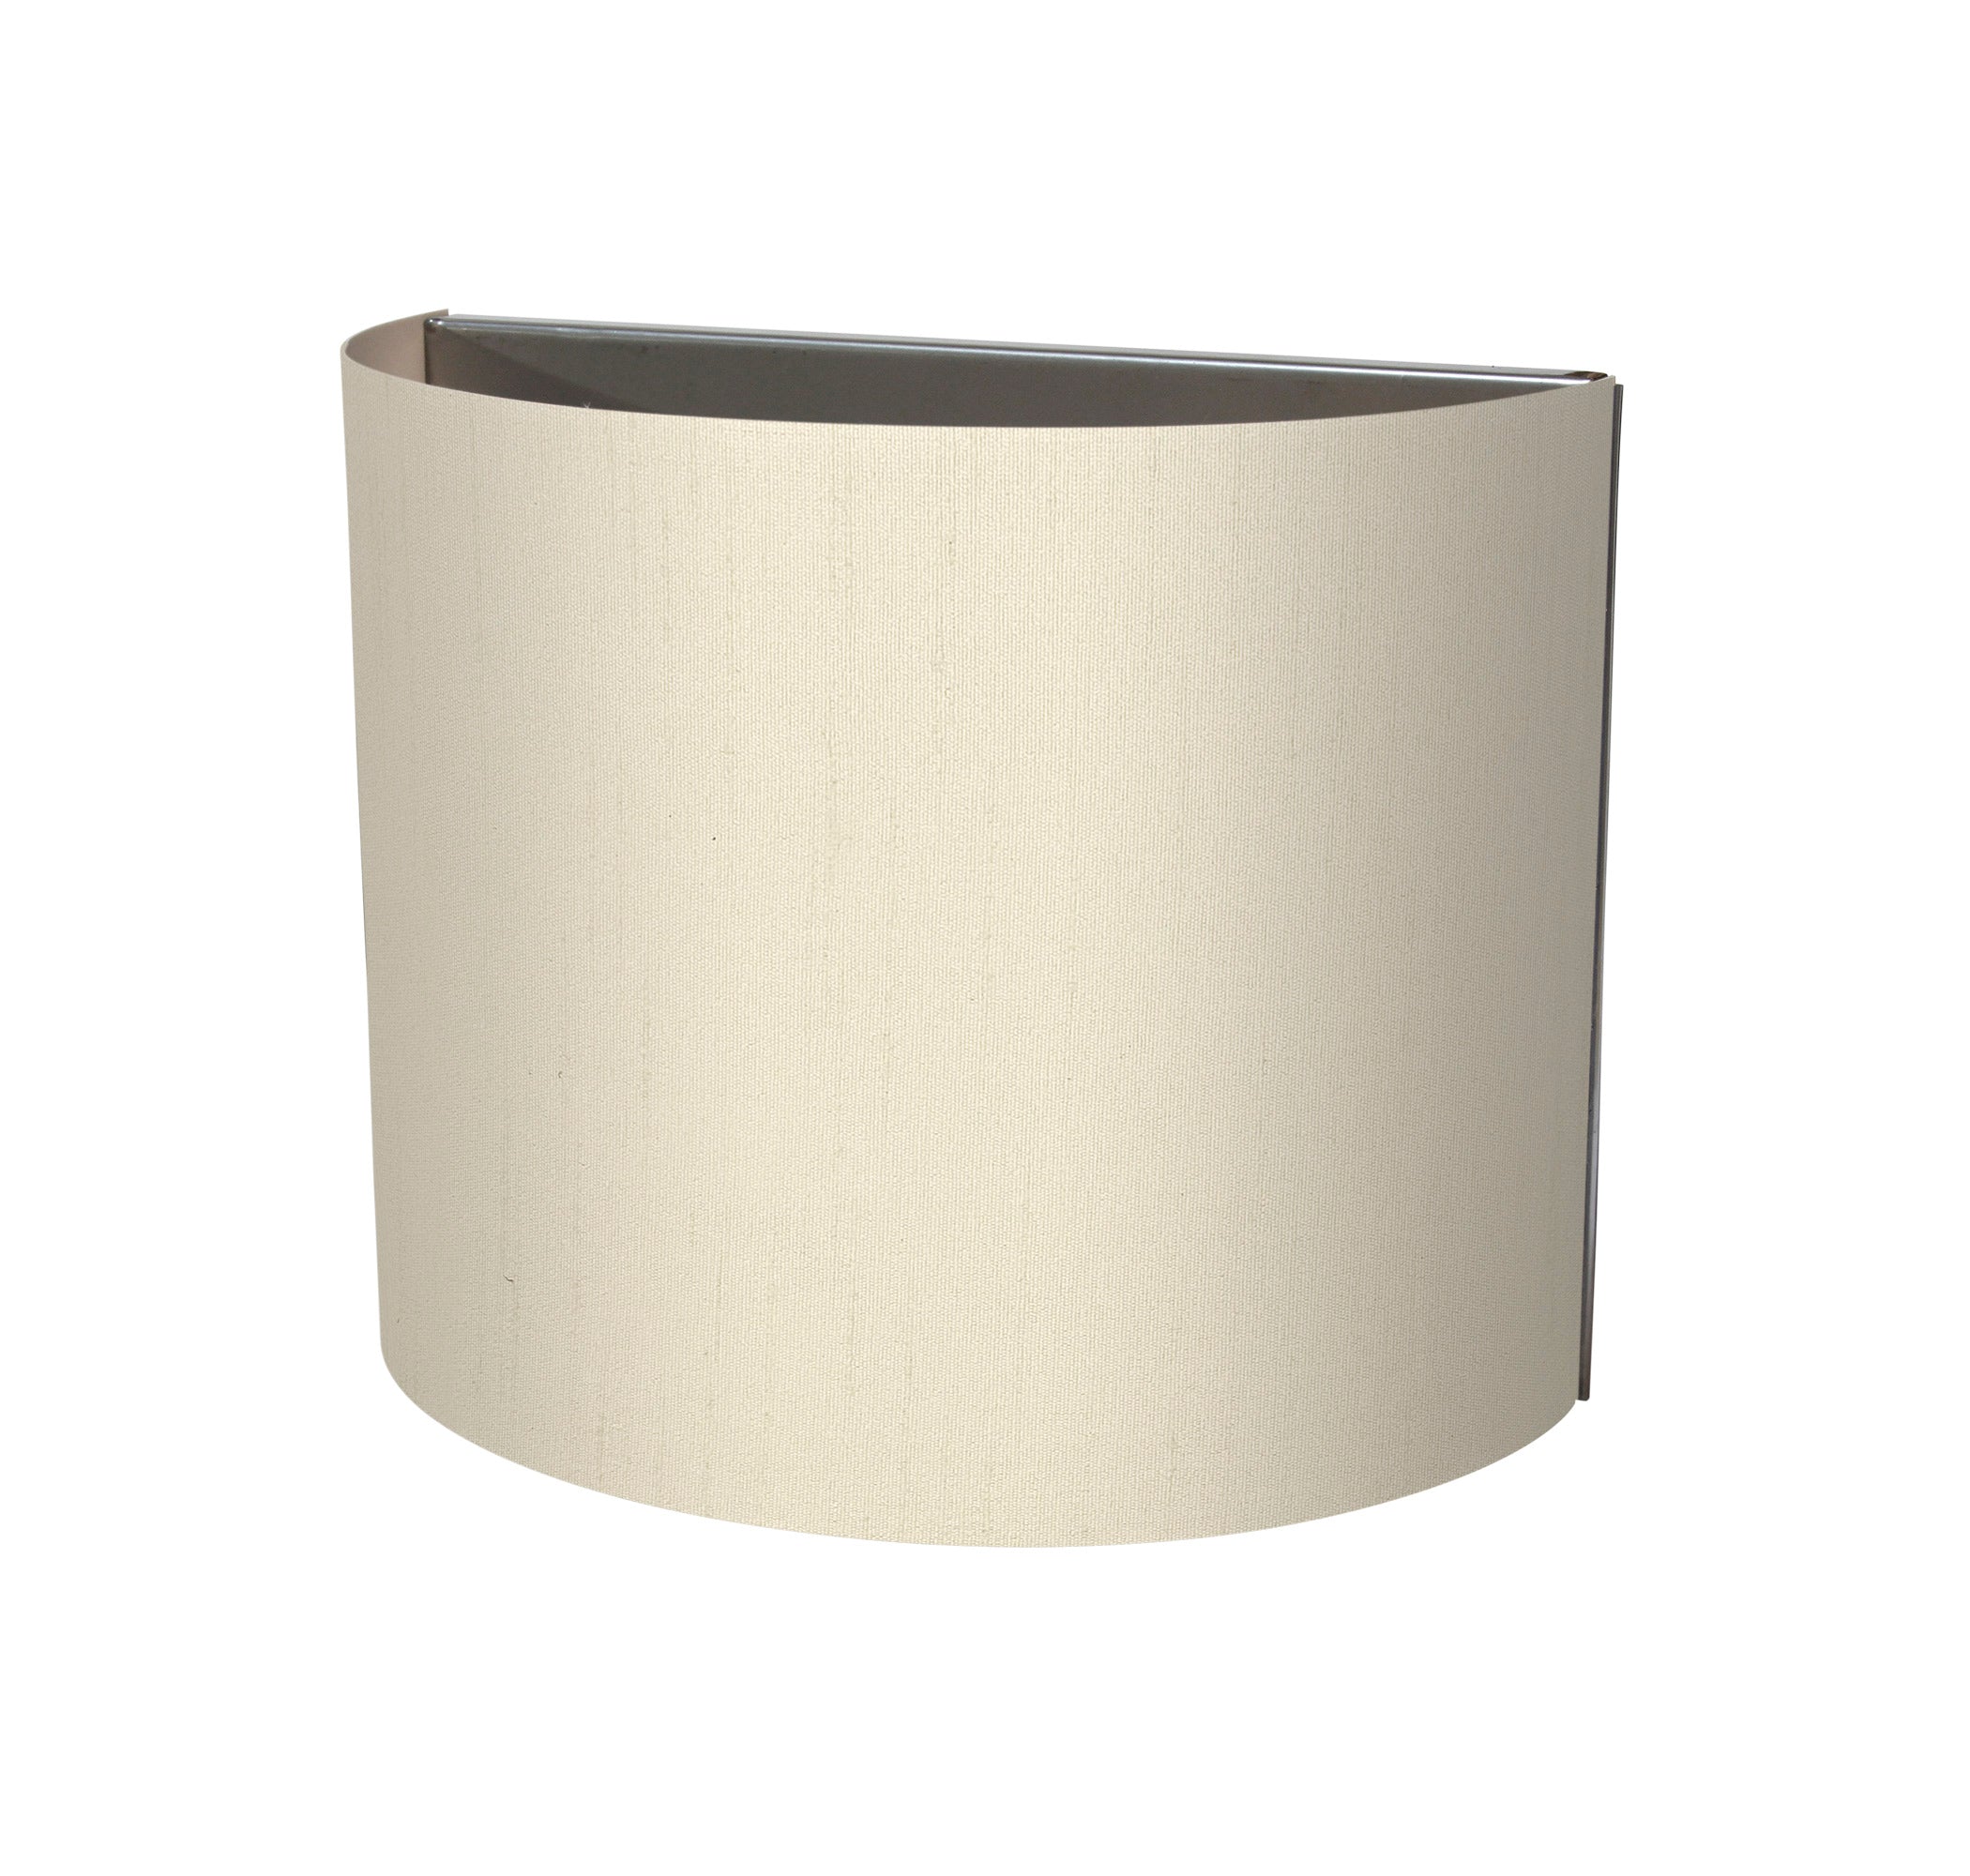 The Vita Wall Sconce from Seascape Fixtures in silk, cream color.